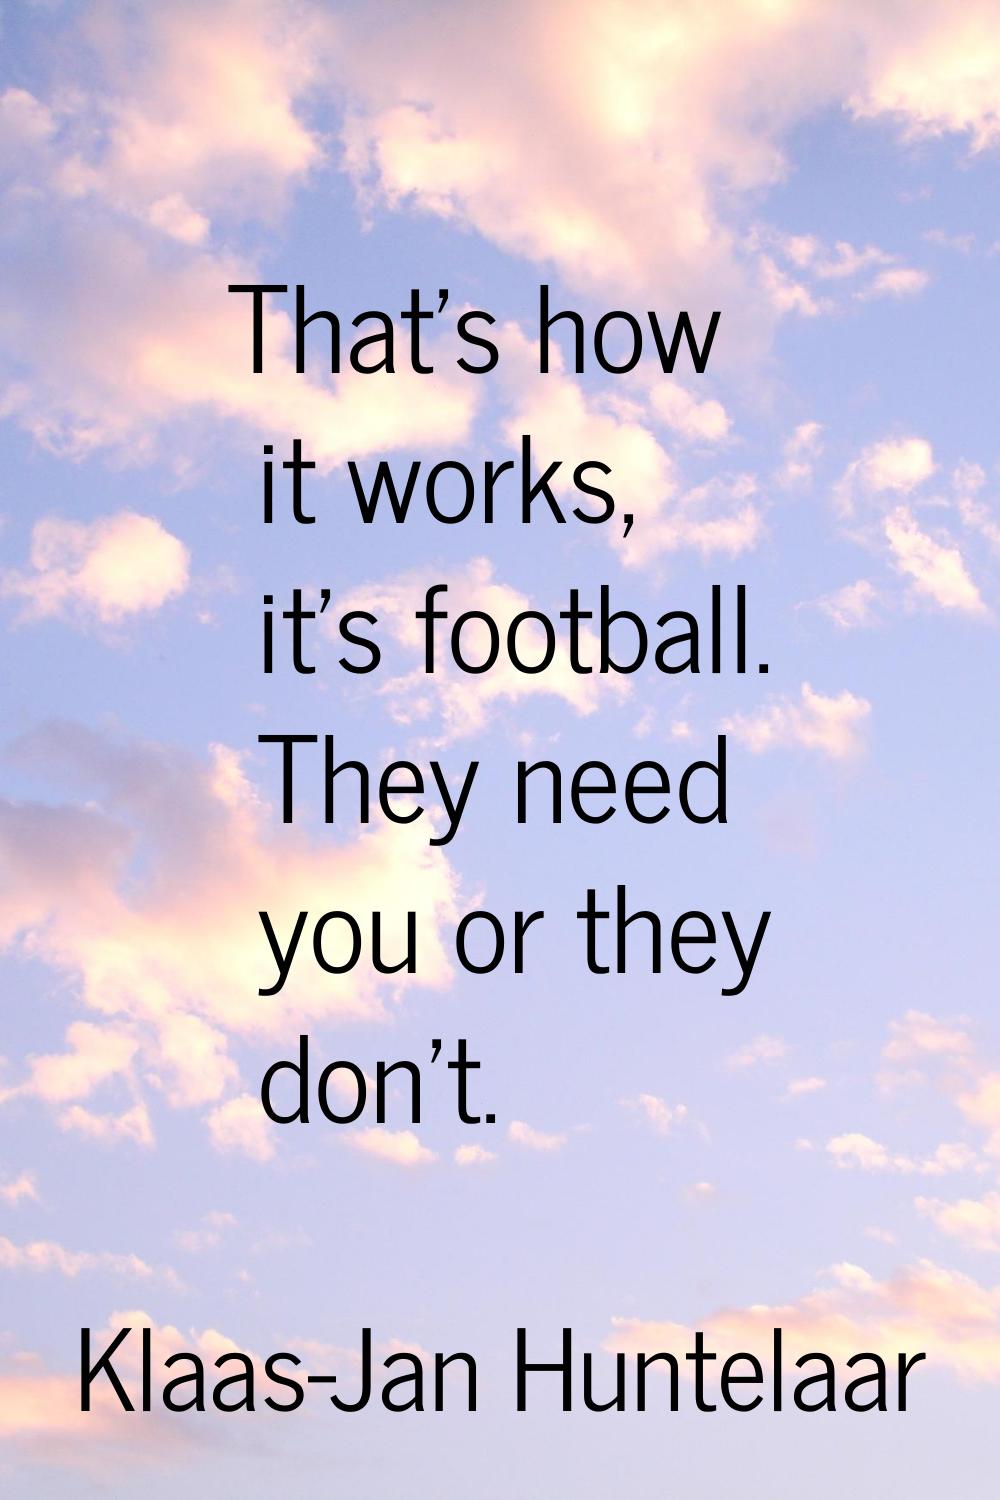 That's how it works, it's football. They need you or they don't.